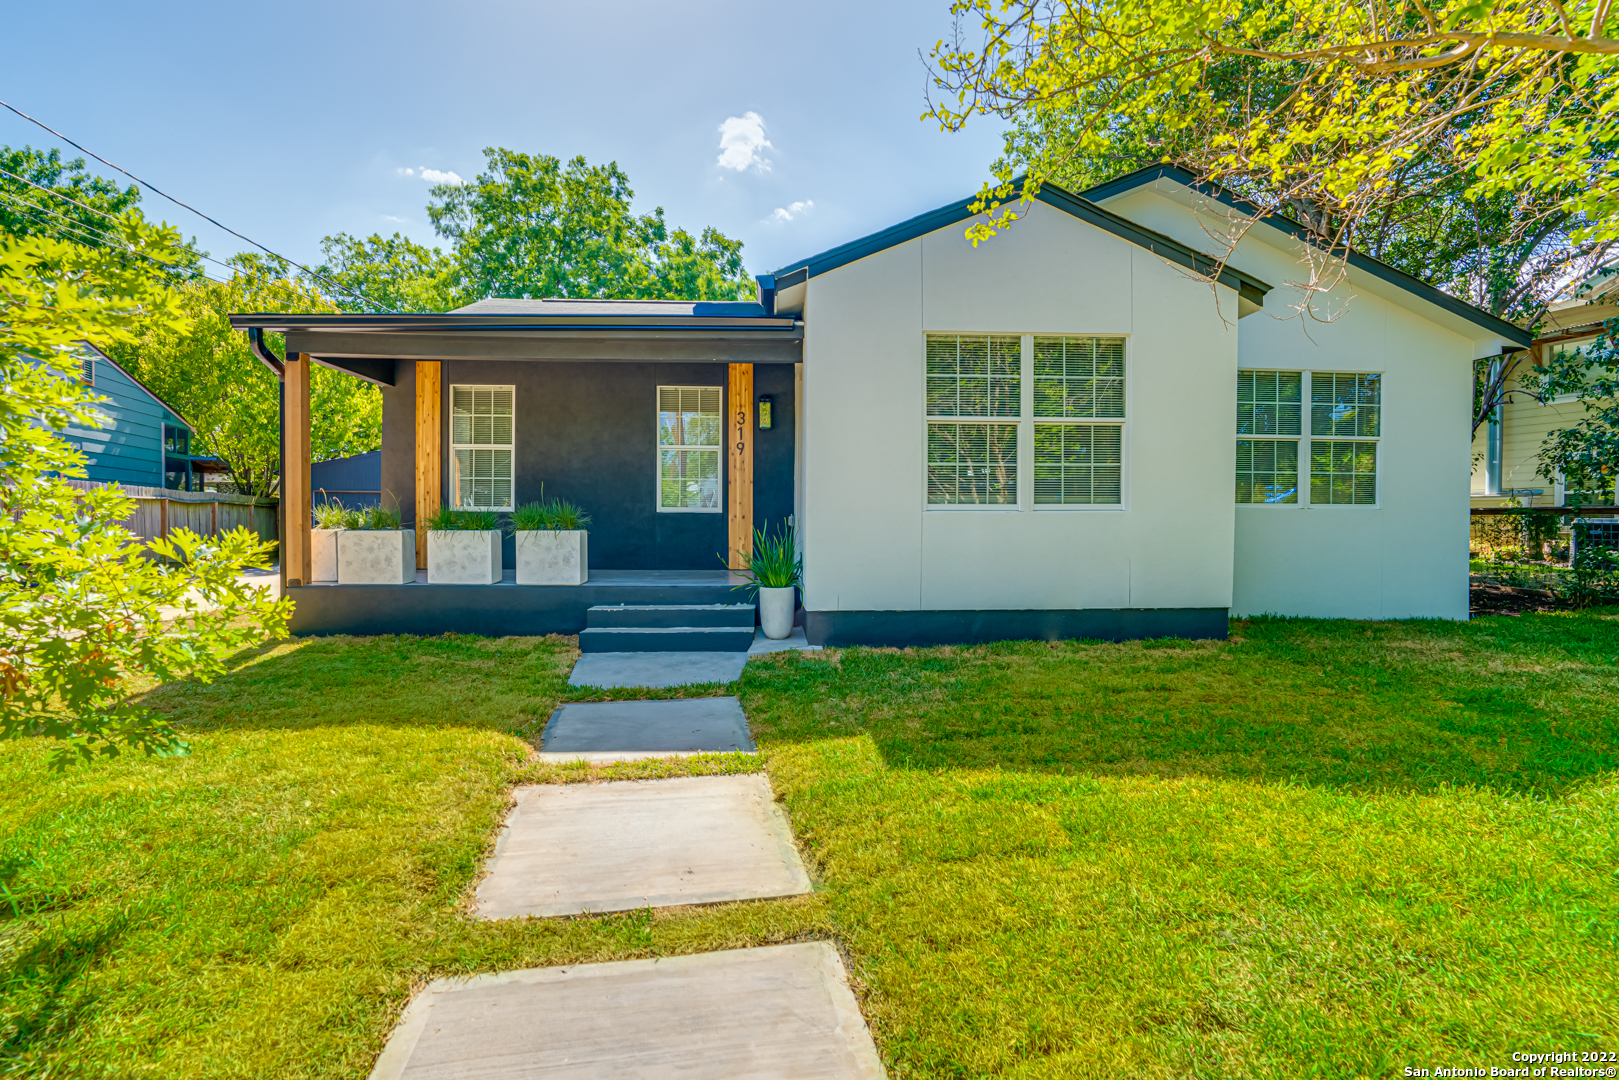 **Multiple Offers** Please submit best & final by Sunday 6/26 at 7:00 pm     **Back up offer received as well** Don't miss your opportunity to view this fantastic single story home that has been reimagined from top to bottom in the Terrell Heights community!  This newly remodeled home sits on almost a quarter acre lot and is located in the highly desirable Alamo Heights ISD.  The interior of the home features an open floorplan layout and has waterproof laminate flooring throughout.  The spacious kitchen area includes bar top seating, open shelving, granite counters, stove/cooktop with hood vent, dishwasher and large pantry.  The living room boasts plenty of natural light, electric fireplace, ceiling fan and is open to the formal dining space with plenty of seating for everybody.  The spacious primary suite has its own exterior access to the backyard with a covered porch area, ceiling fan and ceramic planters. The ensuite bathroom has a large glass enclosed shower, double vanity with wood framed mirrors and walk in closet.  The secondary bedrooms and additional full bath are situated on the opposite end of the home providing plenty of privacy for all.  The exterior of the home features a beautiful dark grey and white stucco, front porch with ceramic planters, new roof, mature trees, fresh sod, two car detached garage and a 190 sq ft shed with finish outs and controlled temperature.  The home is centrally located near major highways, shopping, dining, entertainment and much more!